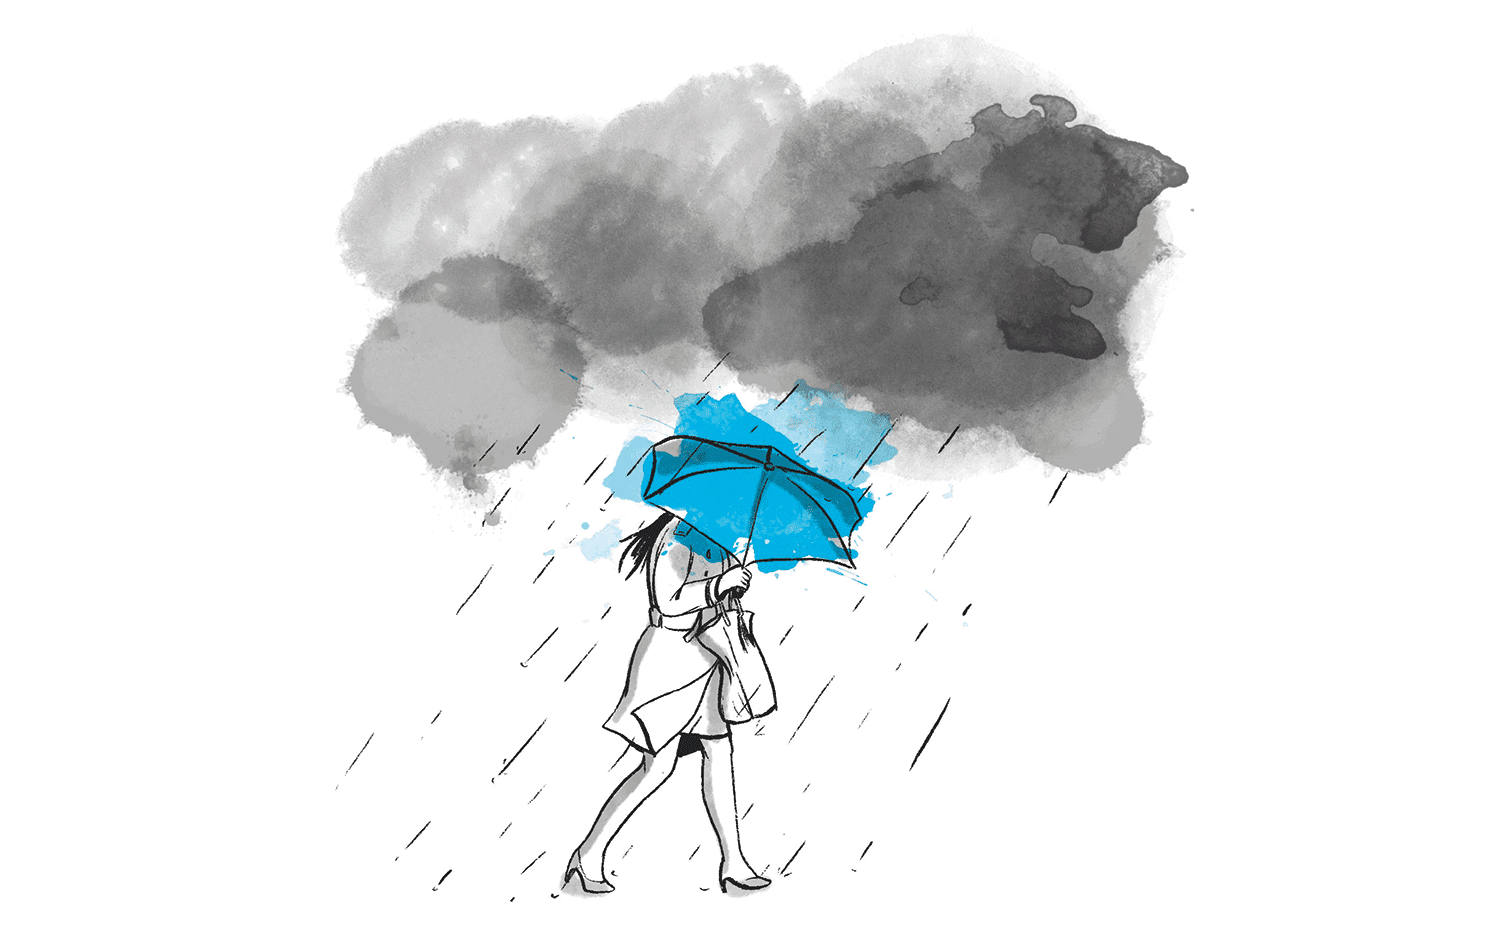 A drawing of a woman holding an umbrella under a storm